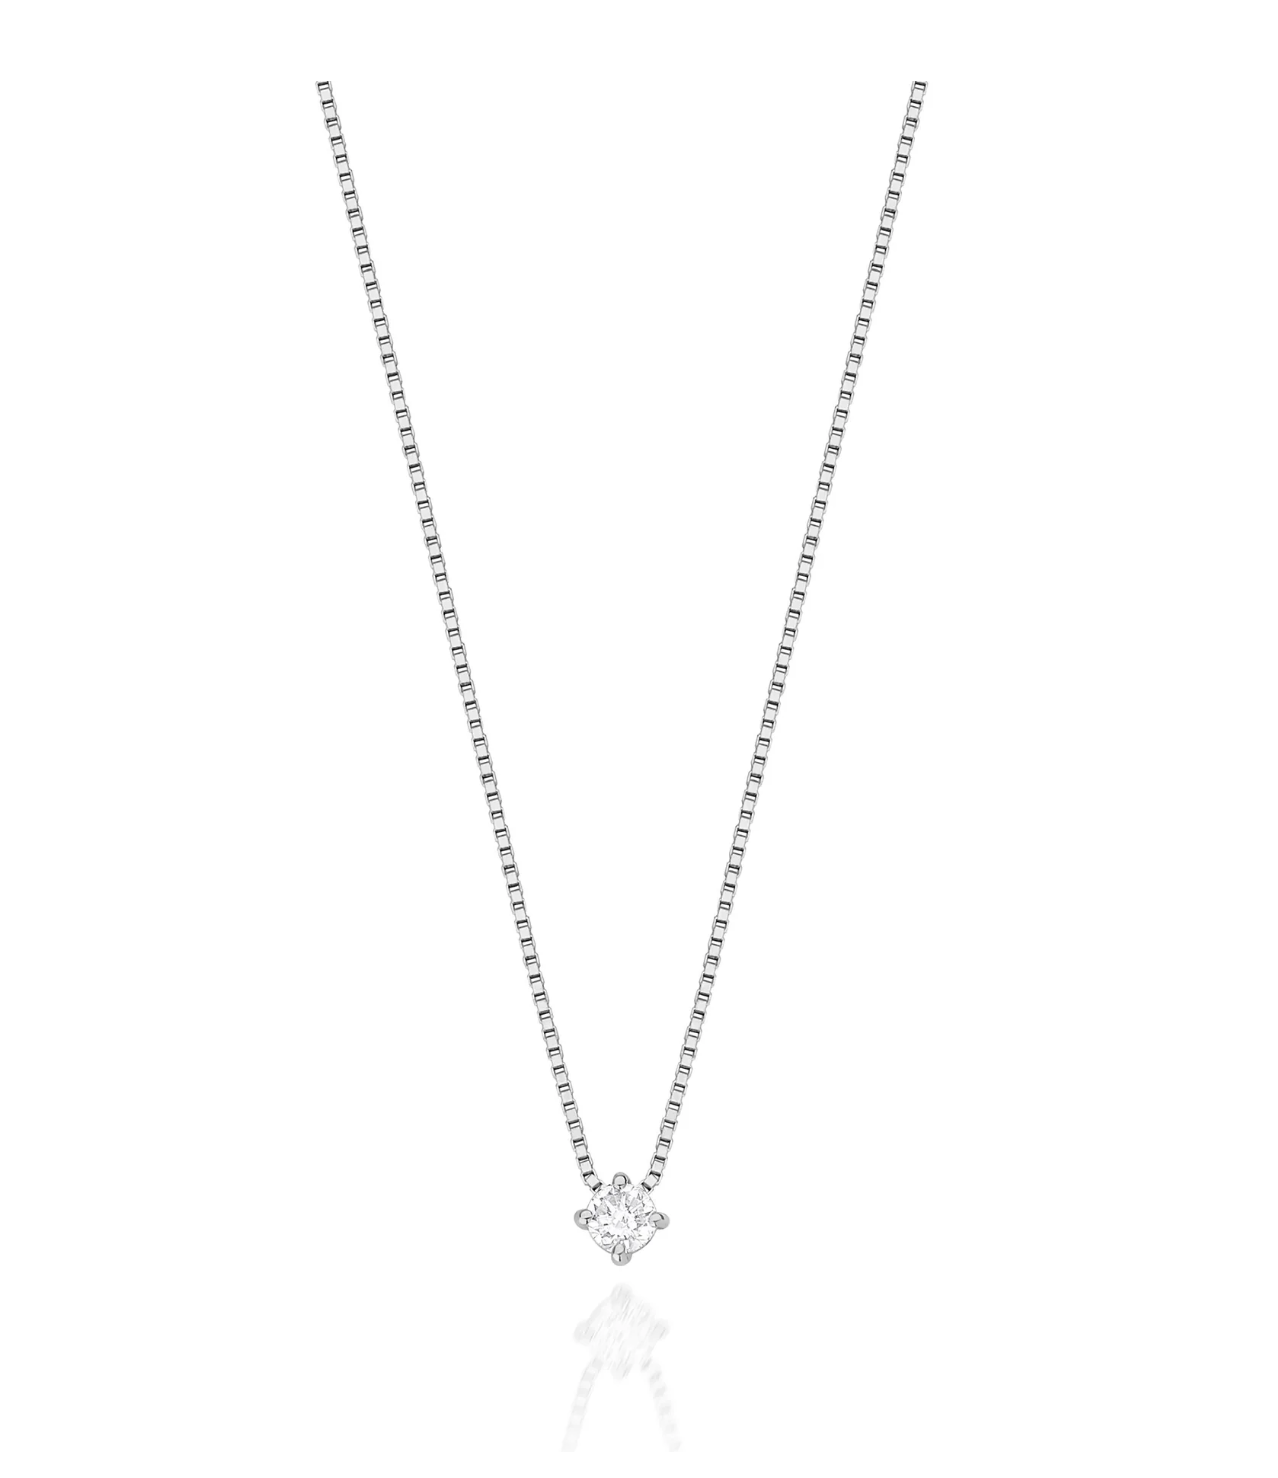 SPECIAL NECKLACE IN 18K WHITE GOLD WITH SOLITARY DIAMOND